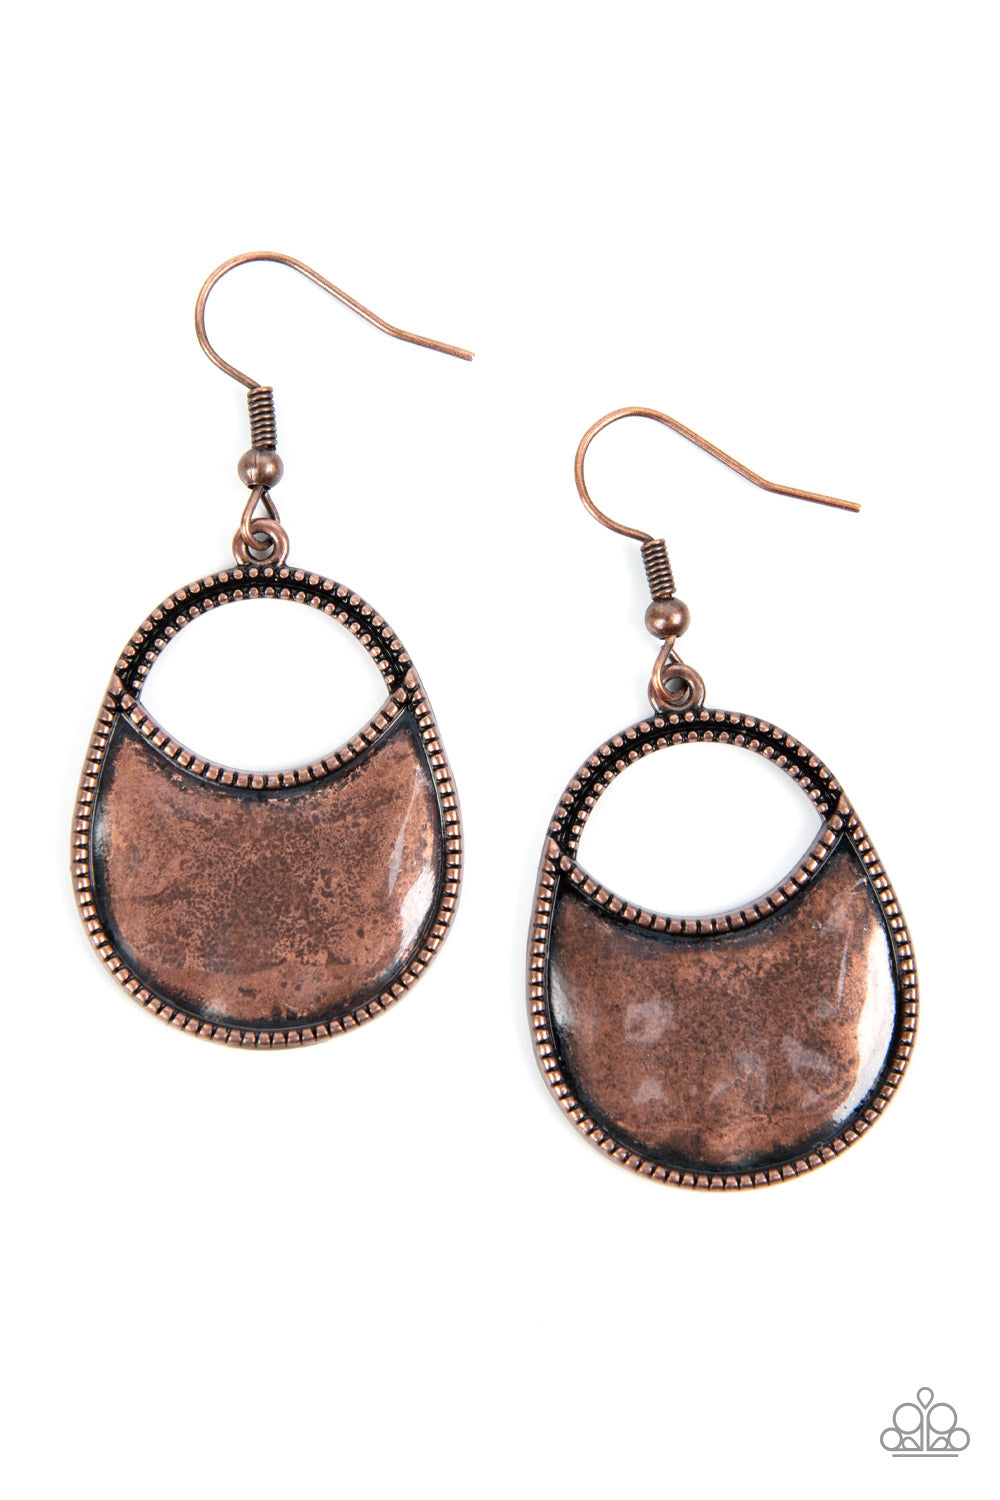 Rio Rancho Relic - Copper Rustic hammered Plate Paparazzi Earrings